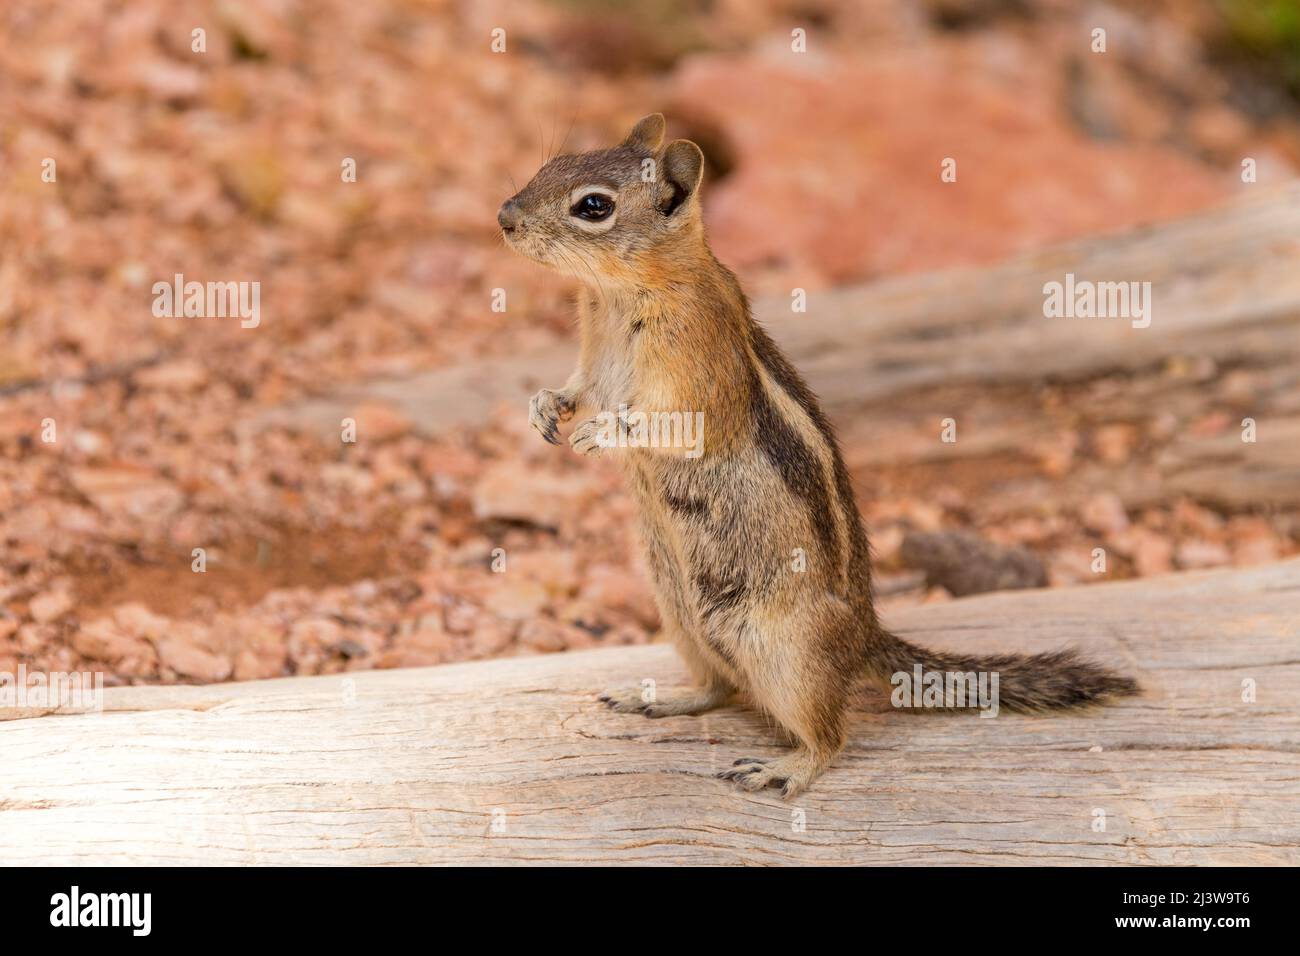 Eastern Chipmunk standing on wooden log in Bryce canyon national park, USA Stock Photo